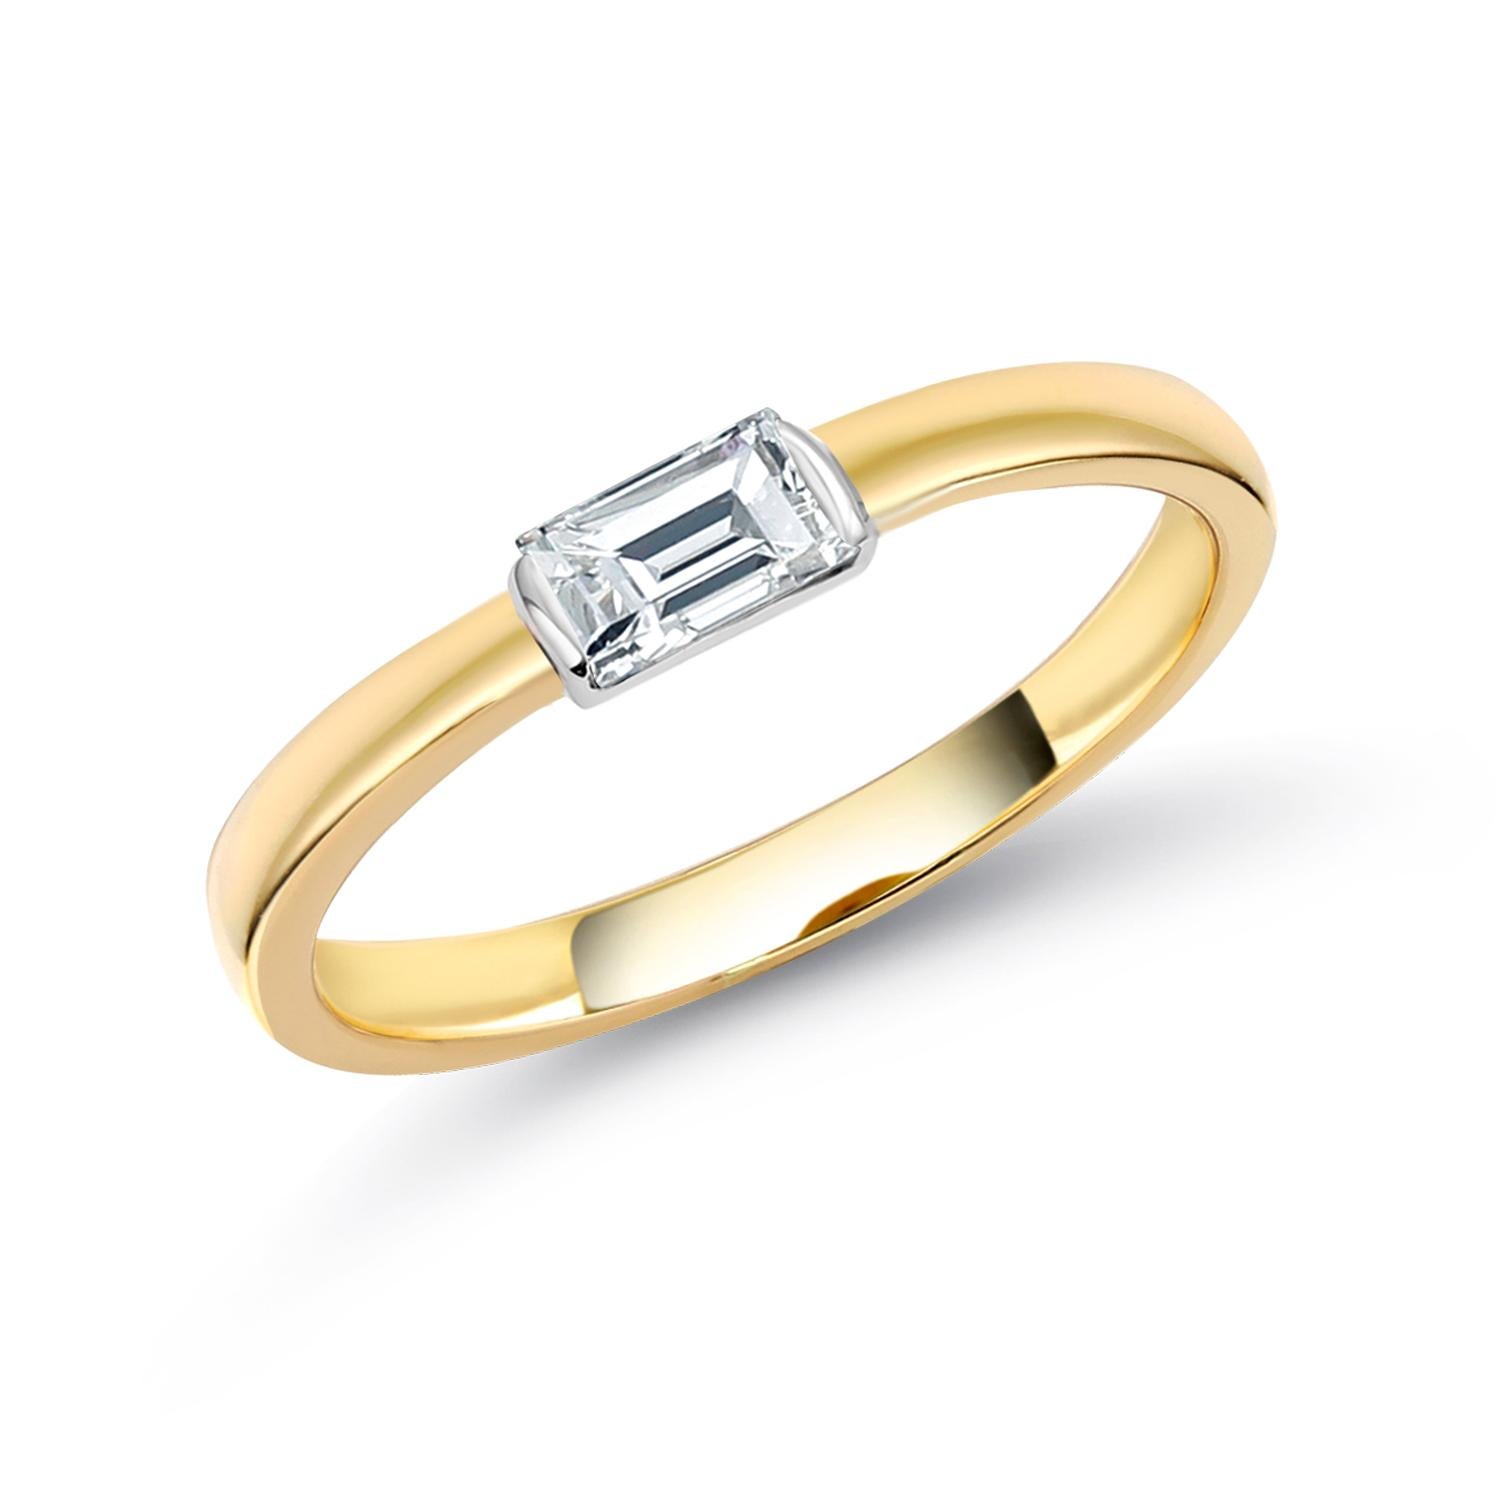 Contemporary Yellow and White Gold Baguette Diamond Solitaire Band Weighing 0.35 Carats